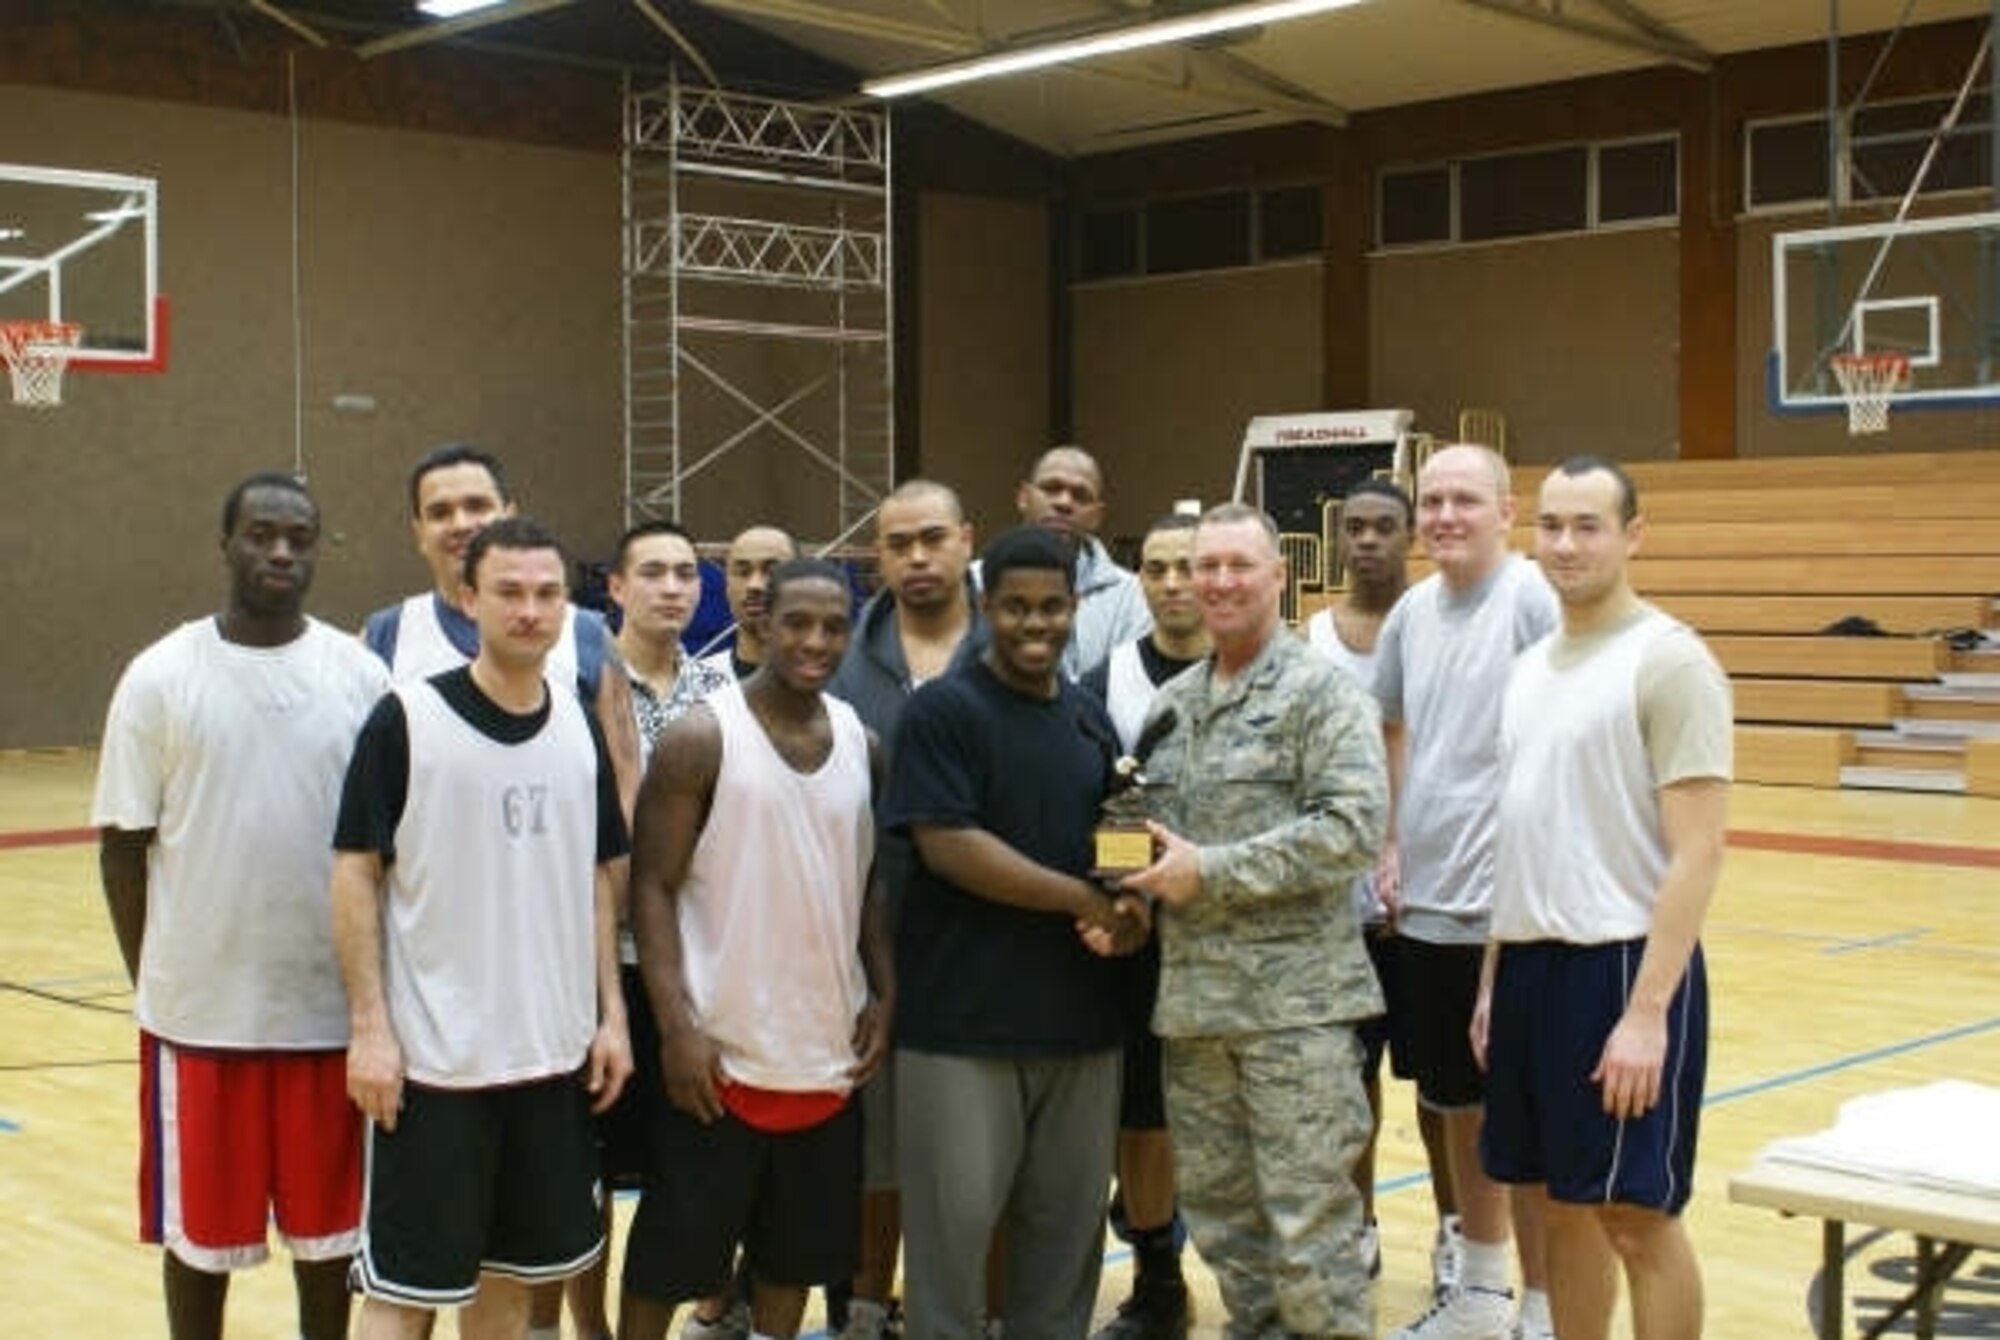 SPANGDAHLEM AIR BASE, Germany -- Col. Lee T. Wright, 52nd Fighter Wing commander, presents the 2008-2009 Intramural Championship trophy to the 52nd C.S. team Jan. 29, 2009. (U.S. Air Force photo by Mark Geairn)